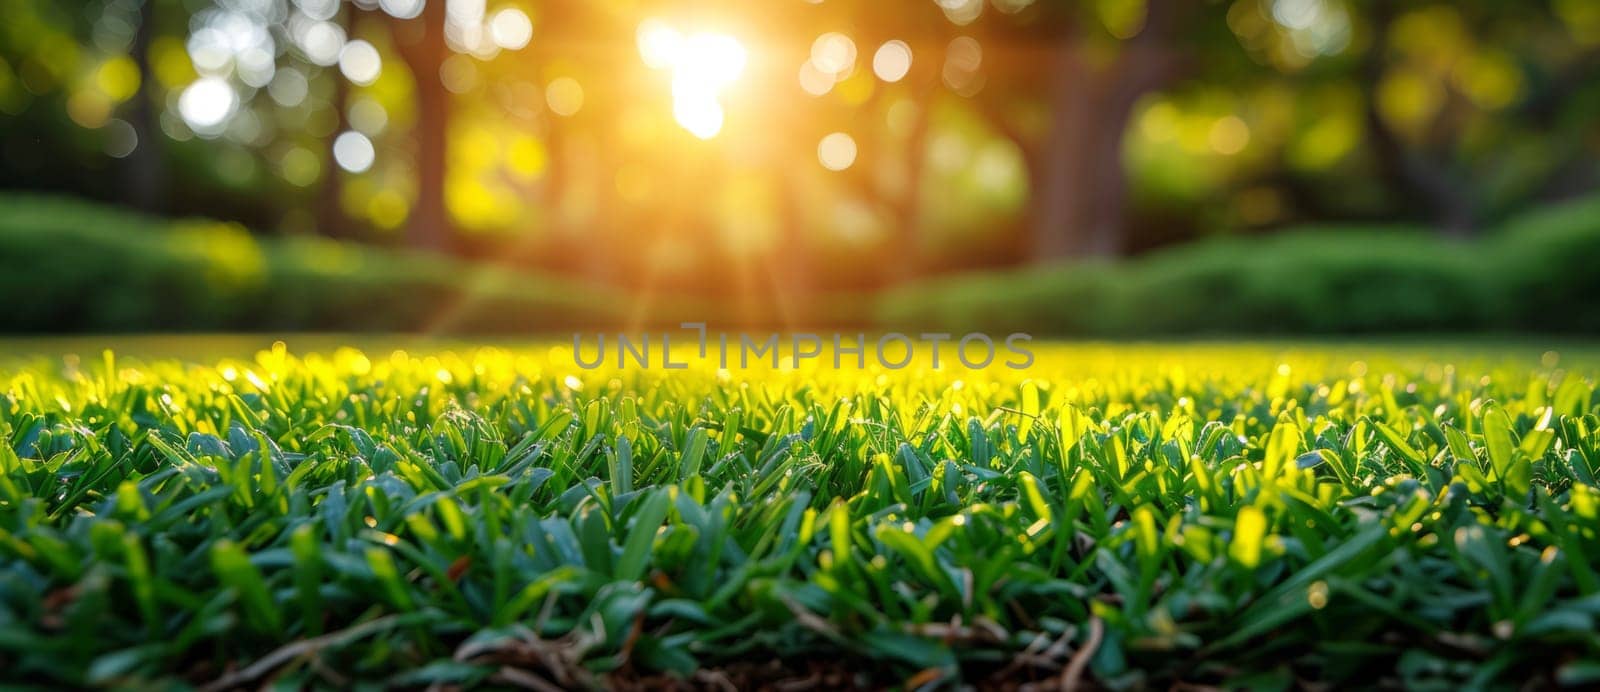 Green grass and sunlight banner background by NataliPopova